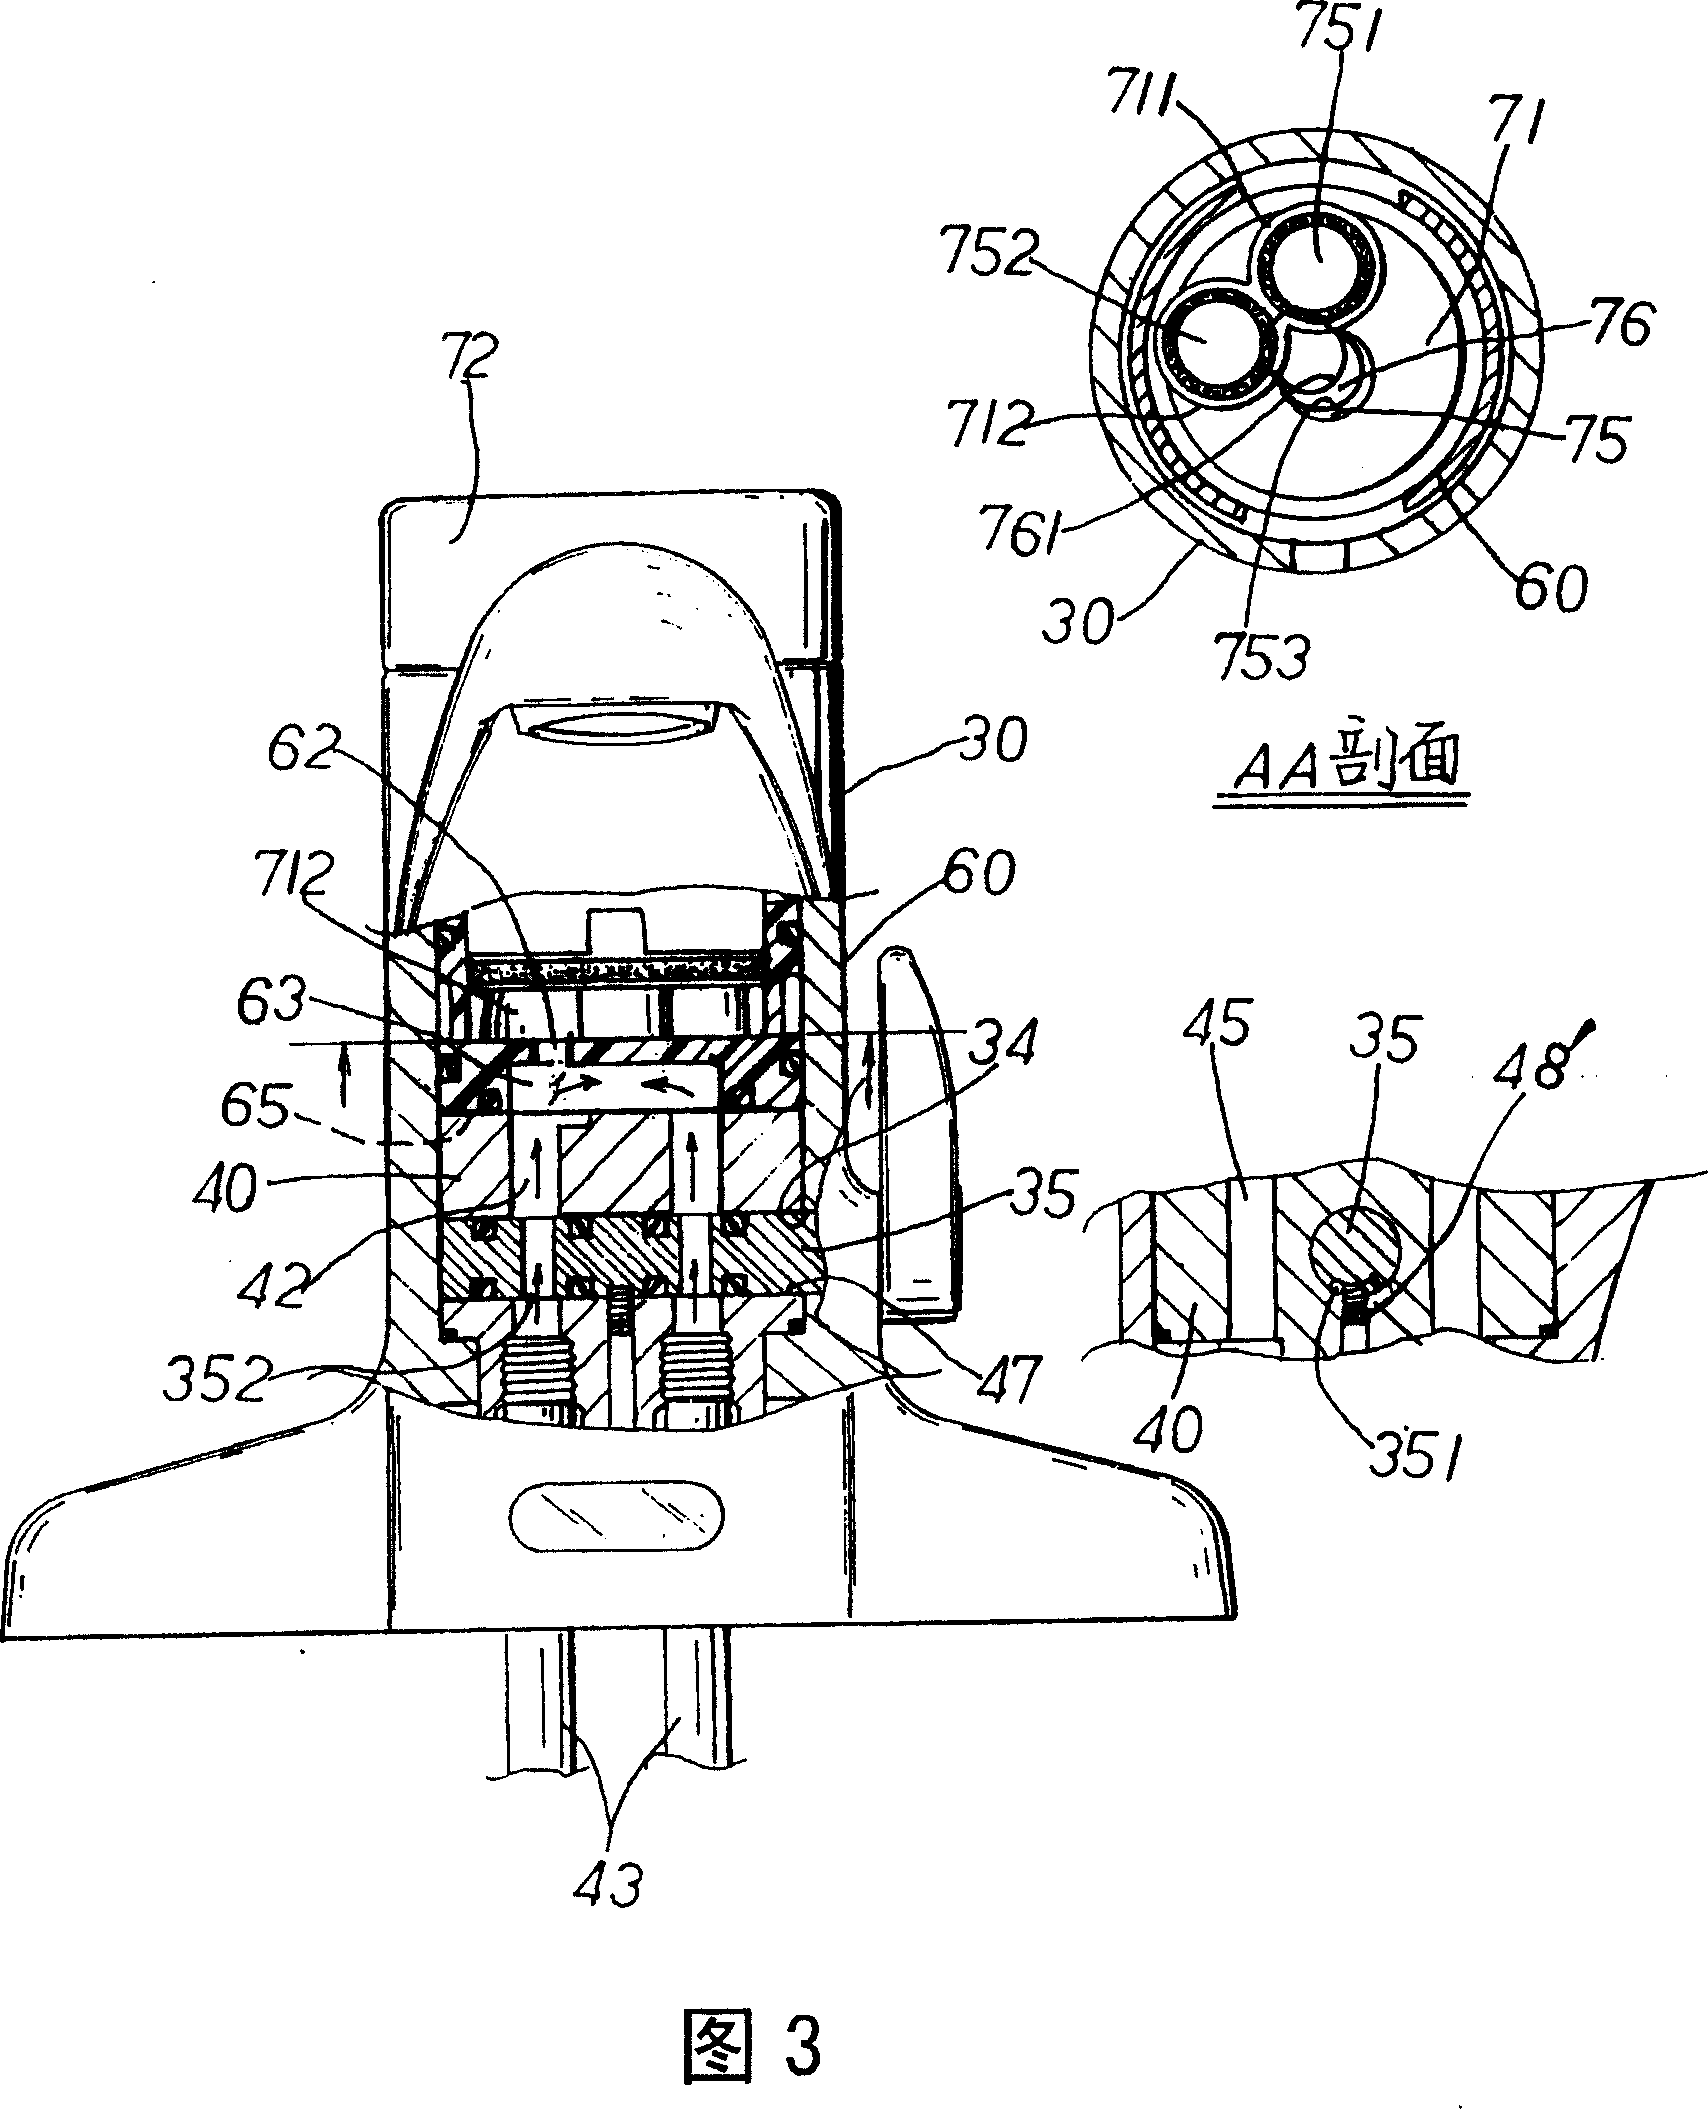 Manual water outlet control structure with cold-hot hybrid inductive tap